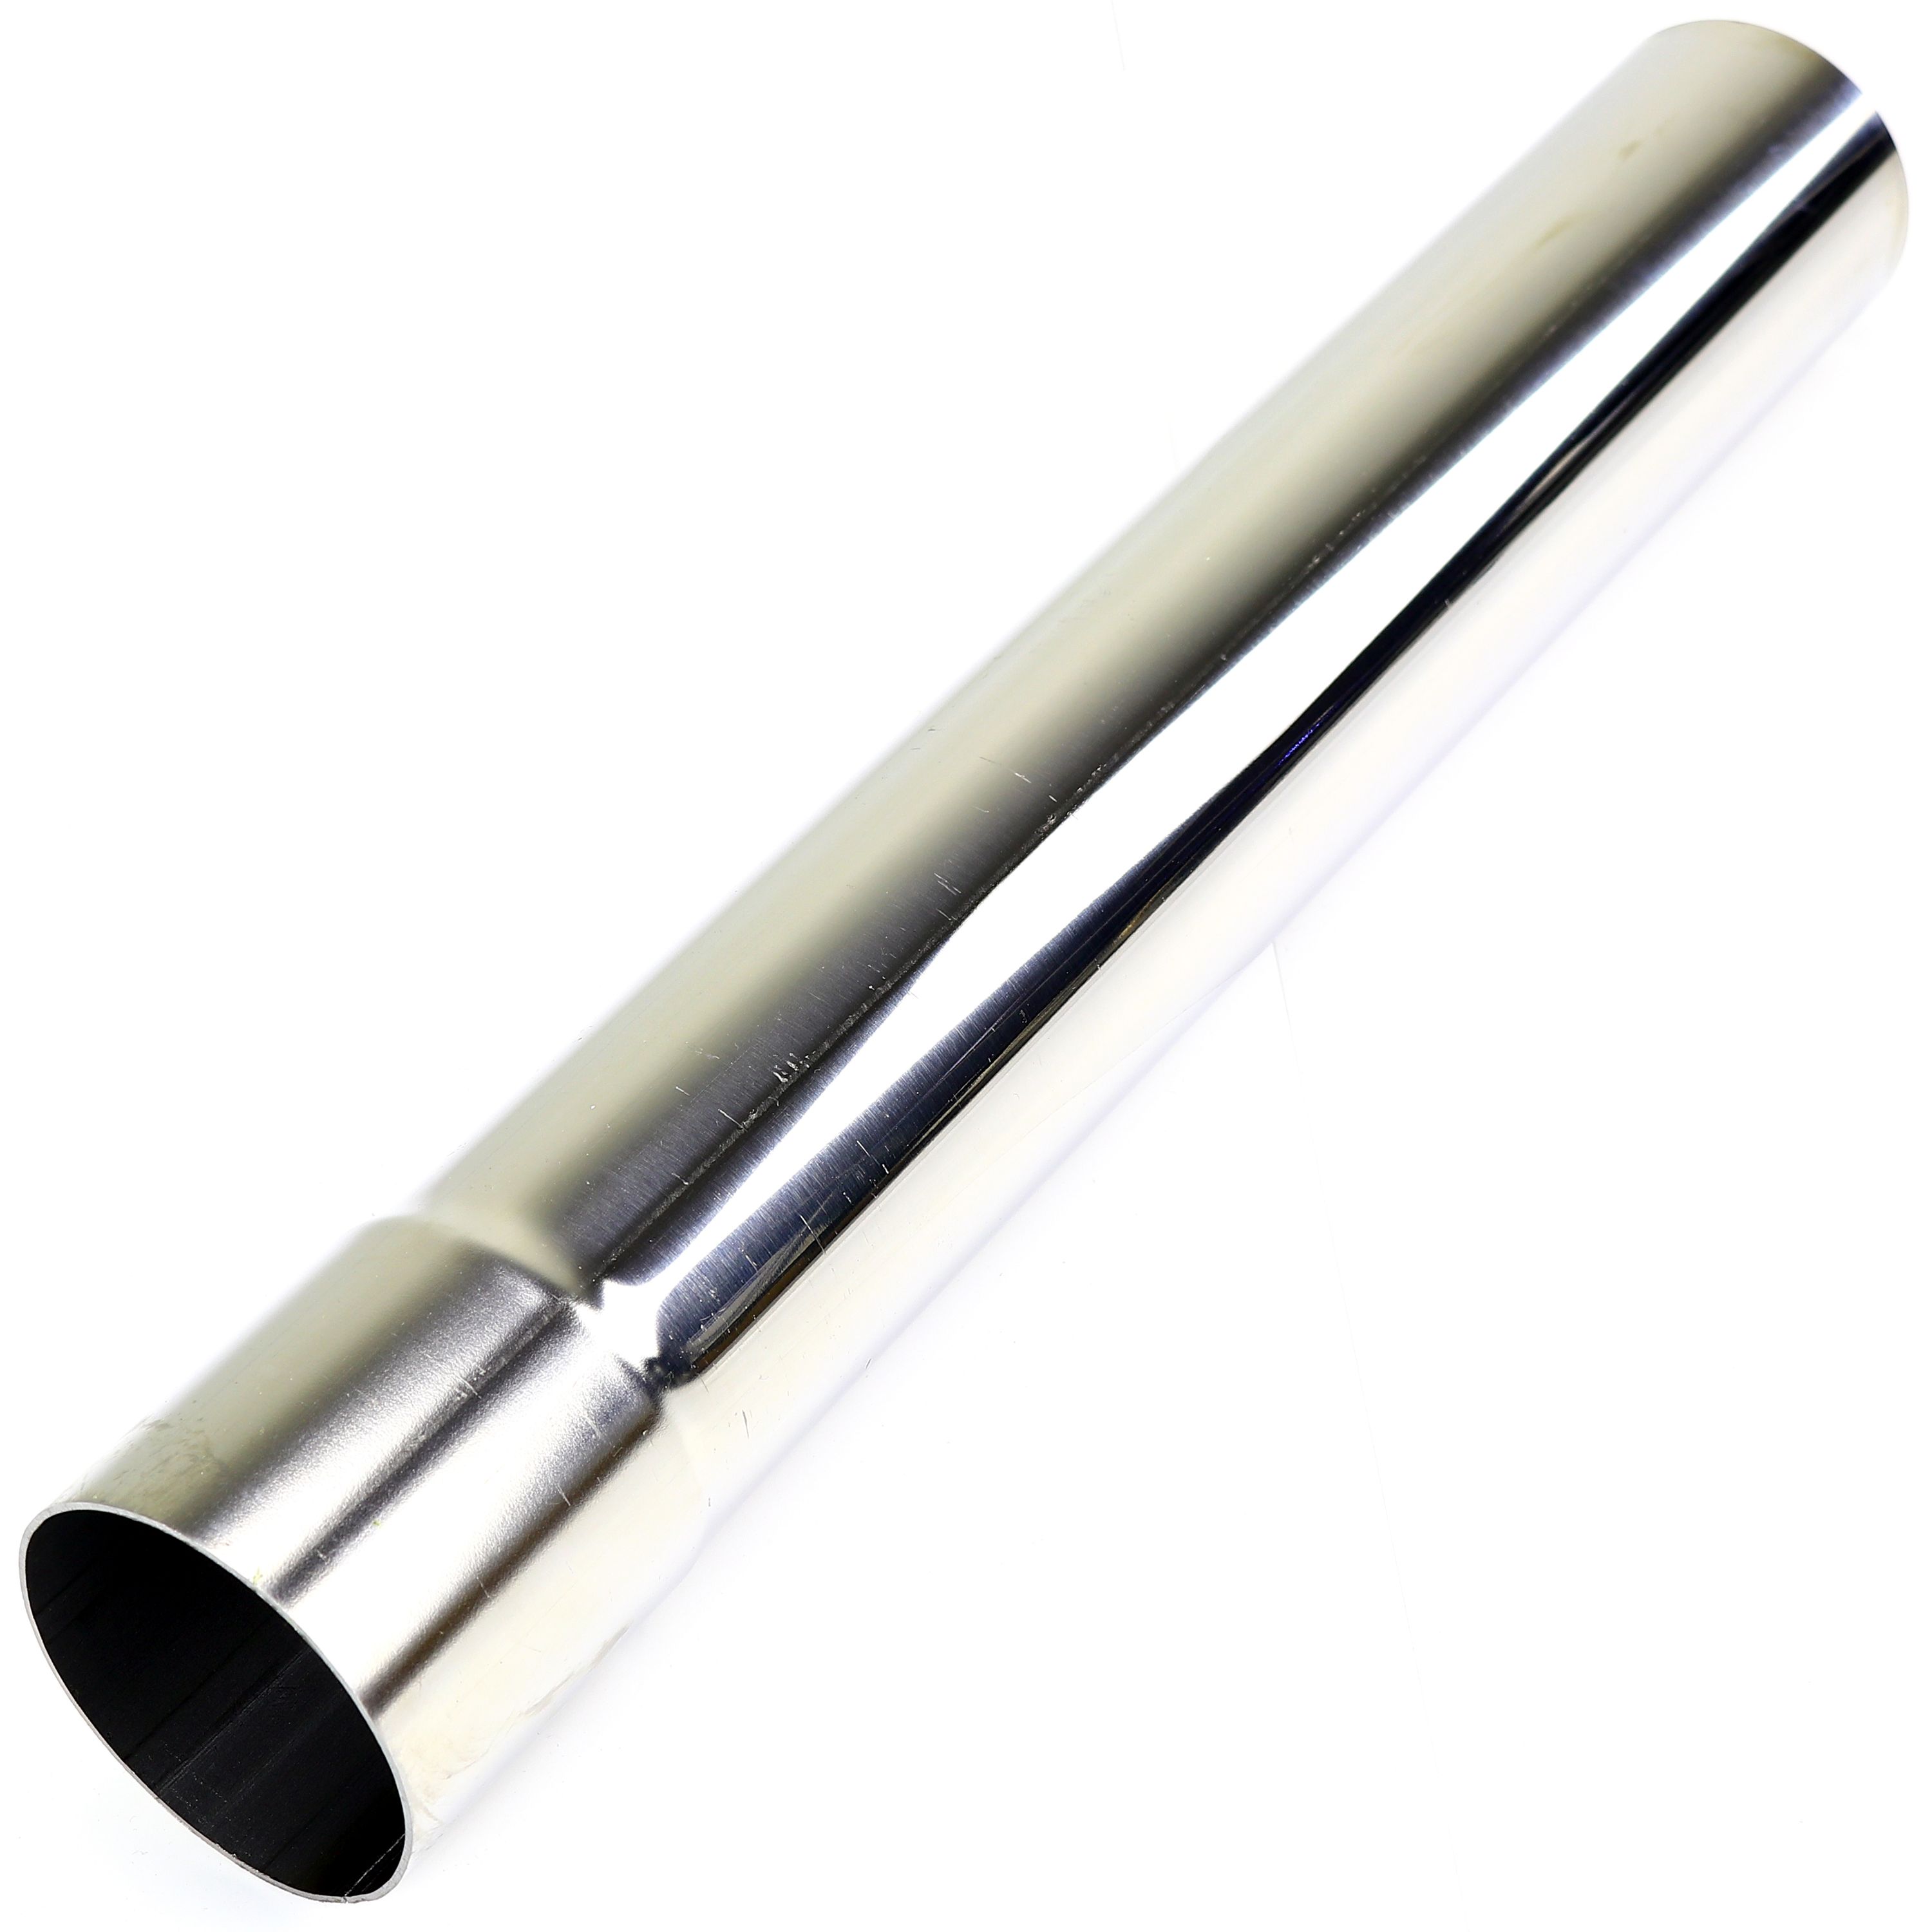 https://www.totalflowusa.com/images/thumbs/0015958_totalflow-20-304-225-151-straight-2-14-inch-slip-on-20-inch-exhaust-pipe-225-inch-id-225-inch-od.jpeg